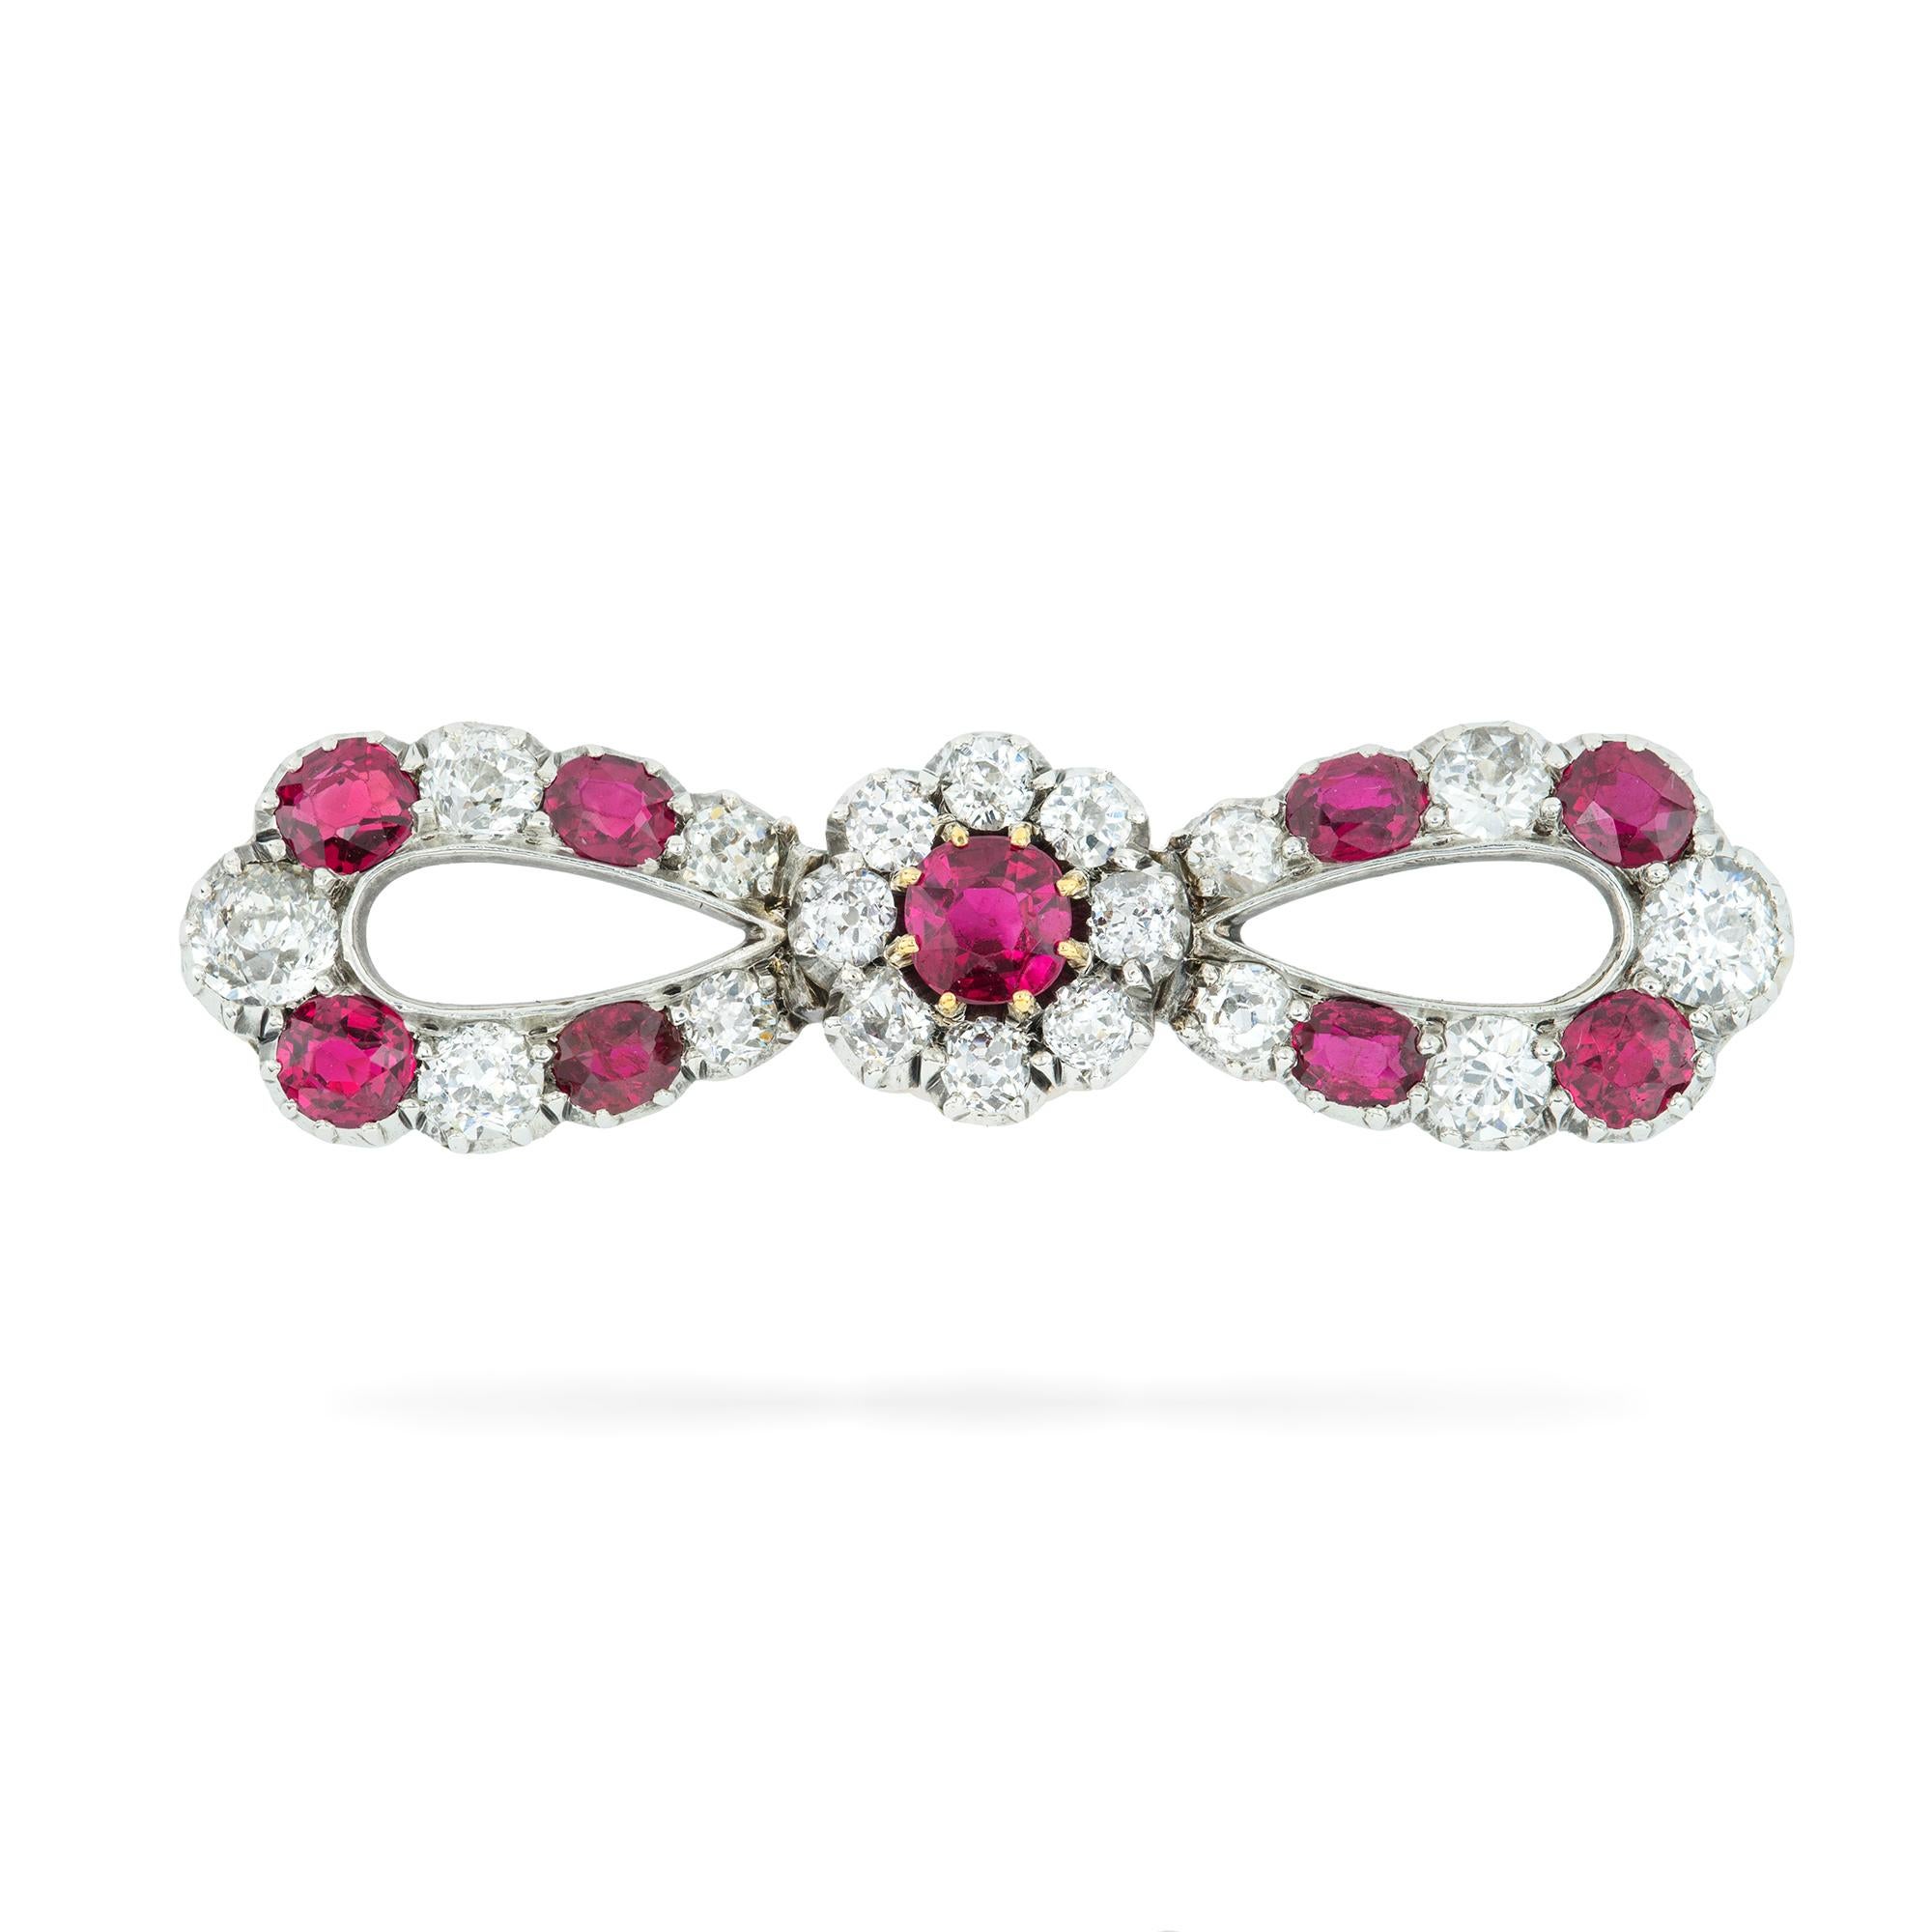 A late Victorian ruby and diamond bow brooch, the centrally set ruby surrounded by an old-cut diamond-set cluster, bow parts alternately-set with graduated round faceted rubies and old brilliant-cut diamonds, the rubies estimated to weigh 0.8 carats